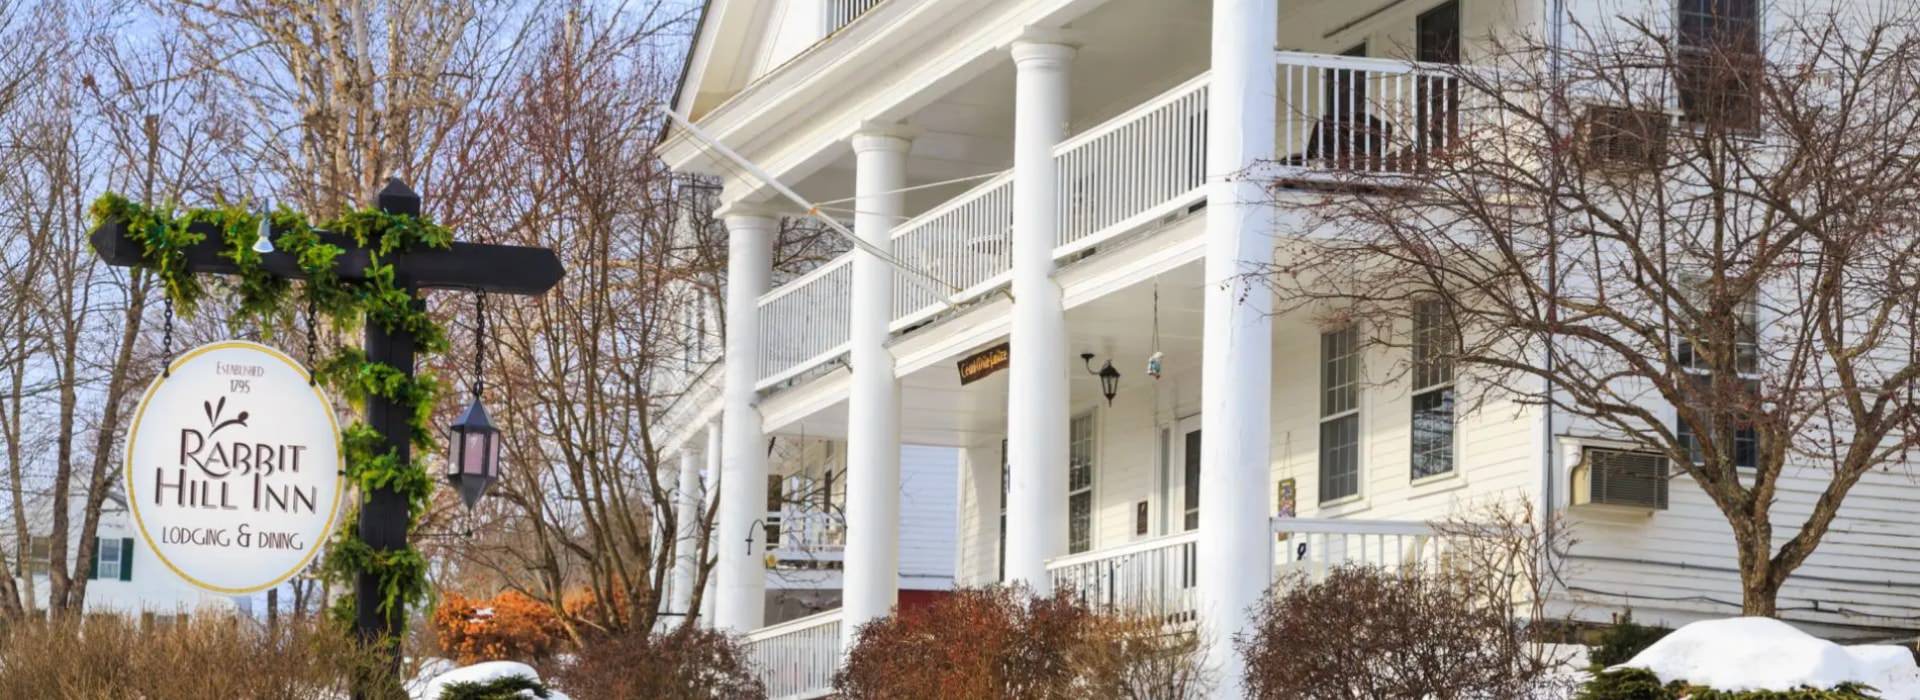 Exterior view of the property painted white with front porch and second level porch all surrounded by snow and winter-looking trees and shrubs